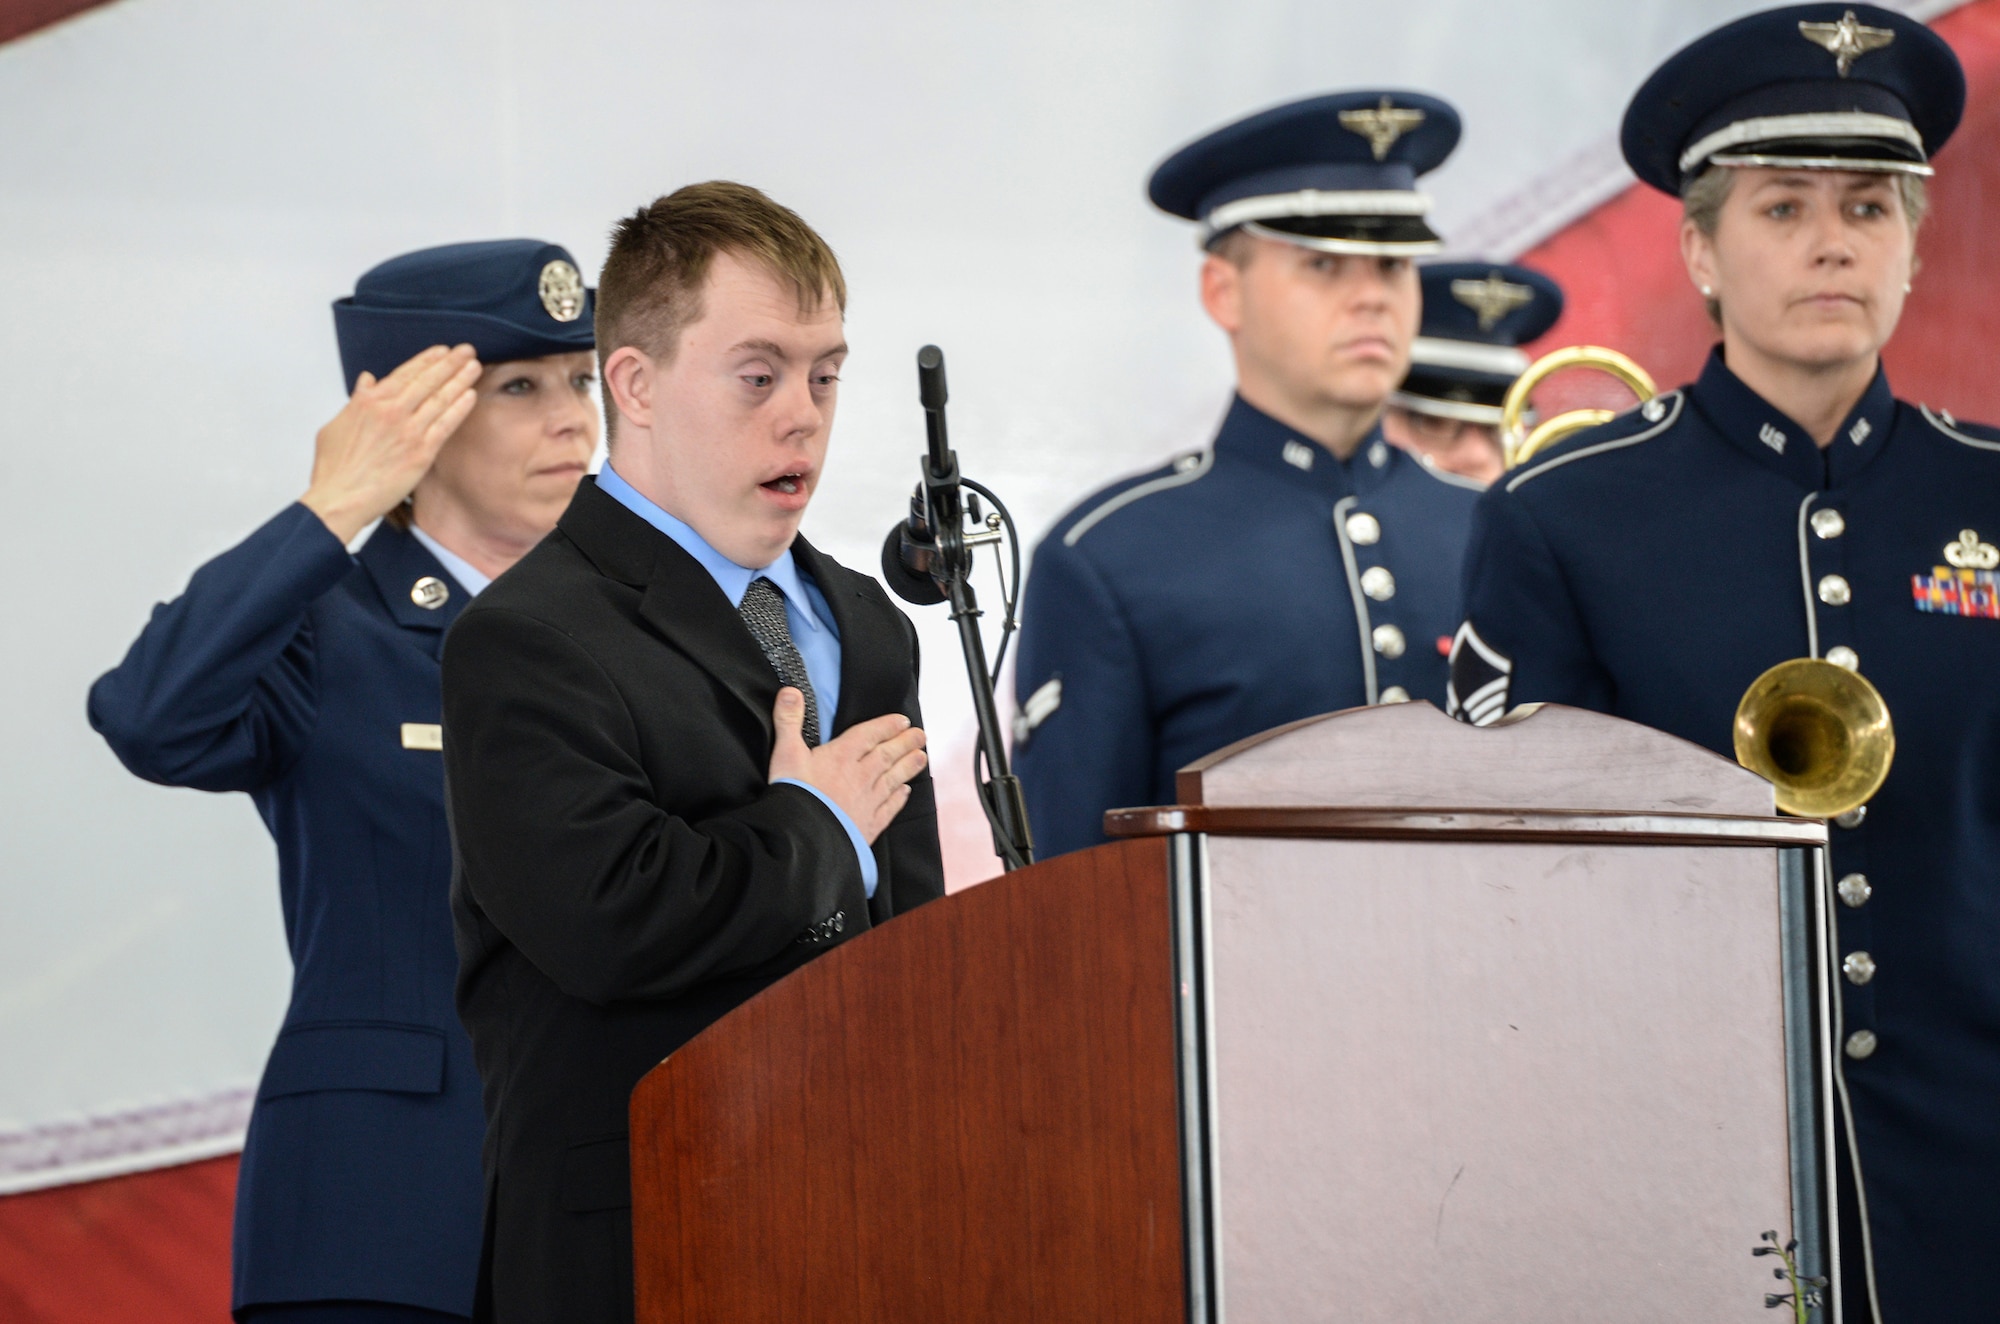 Aaron Cole, a grandson of retired U.S. Air Force Lt. Col. Richard “Dick” E. Cole, sings the national anthem during a memorial service for his grandfather at Joint Base San Antonio-Randolph, Texas, April 18, 2019.